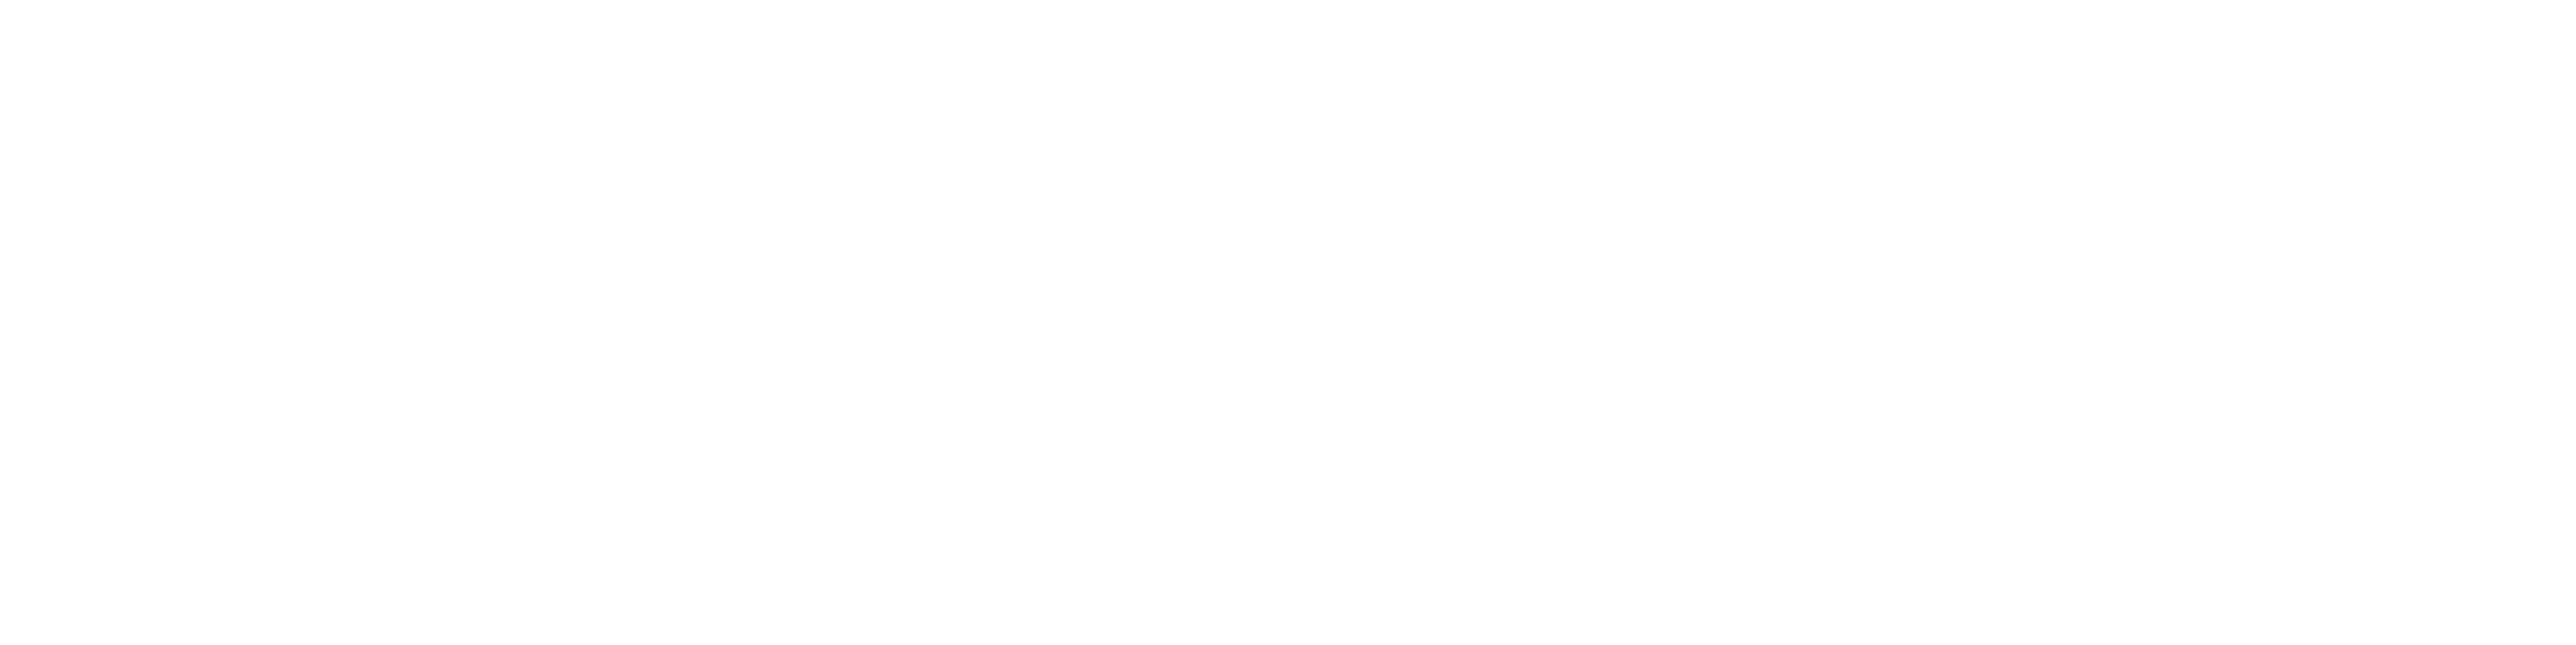 logo with white text and transparent background